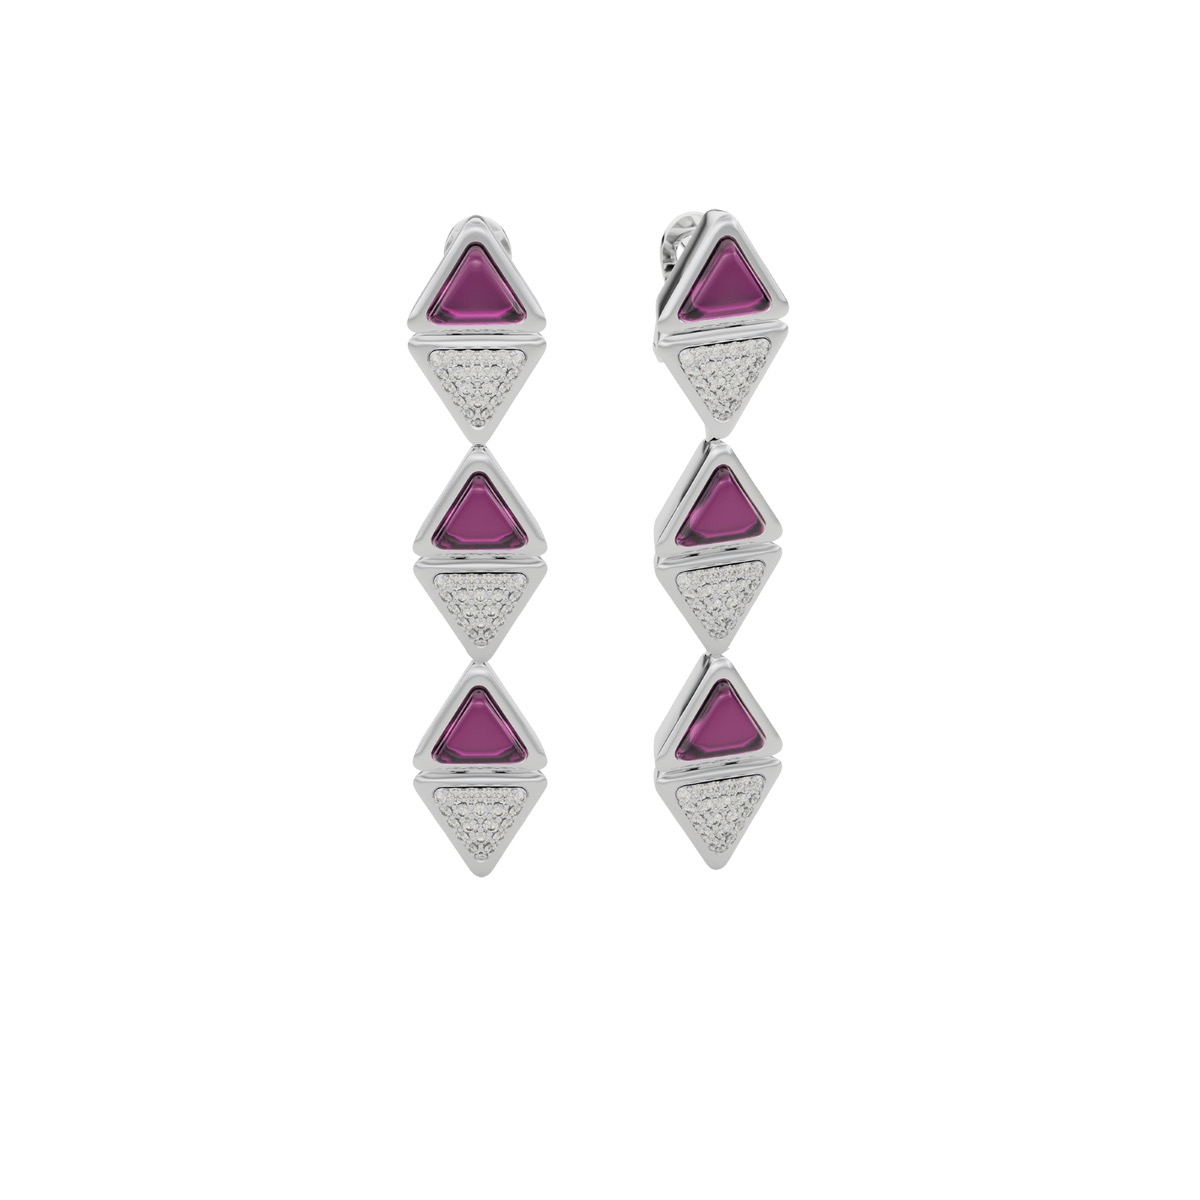 Earrings Long Mirror Exquisite White Gold Pink Garnet and Diamonds